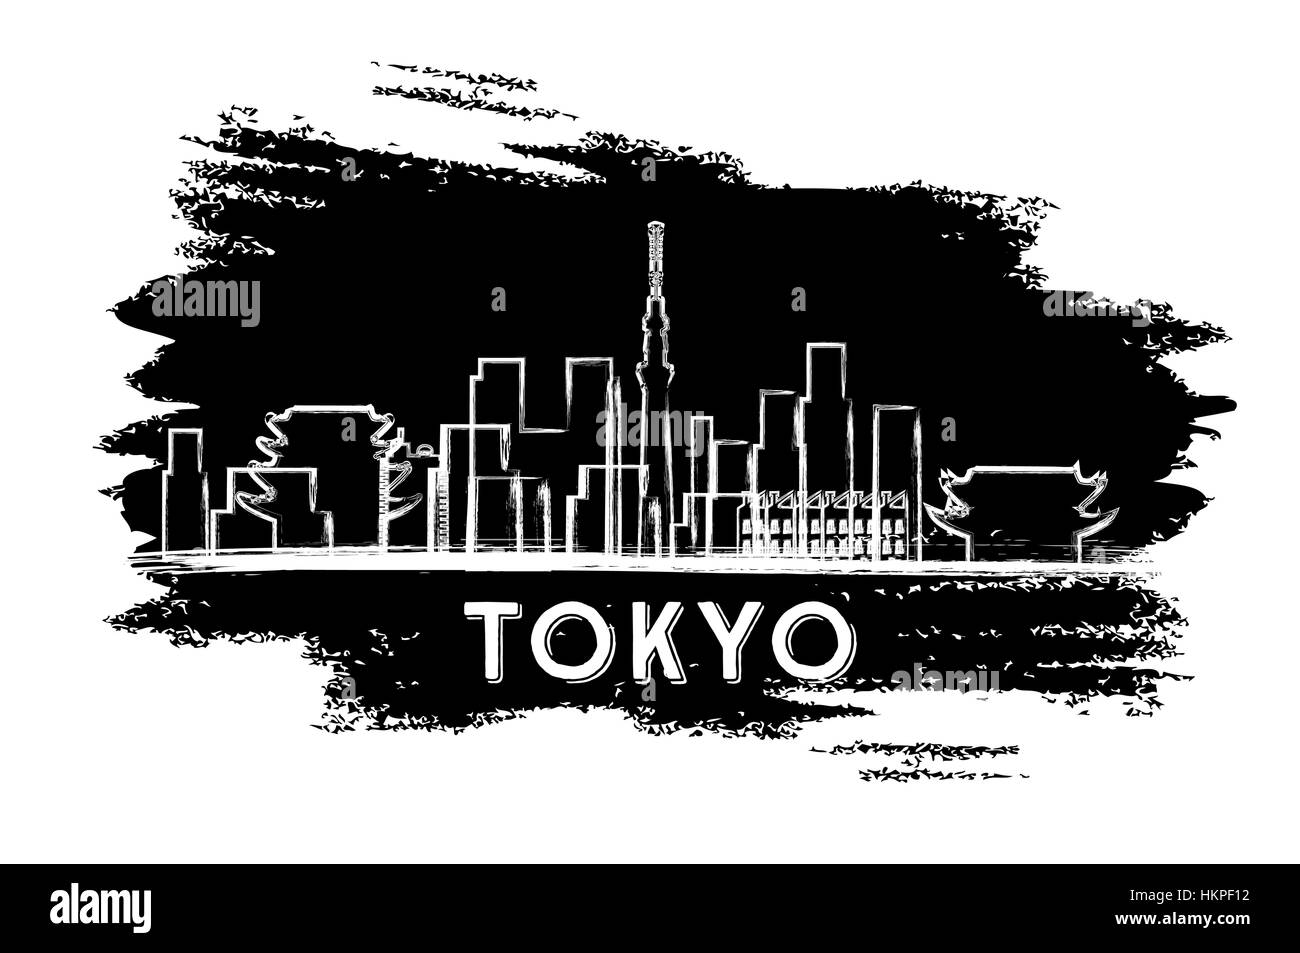 Tokyo Skyline Silhouette. Hand Drawn Sketch. Vector Illustration. Business Travel and Tourism Concept with Modern Architecture. Image for Presentation Stock Vector